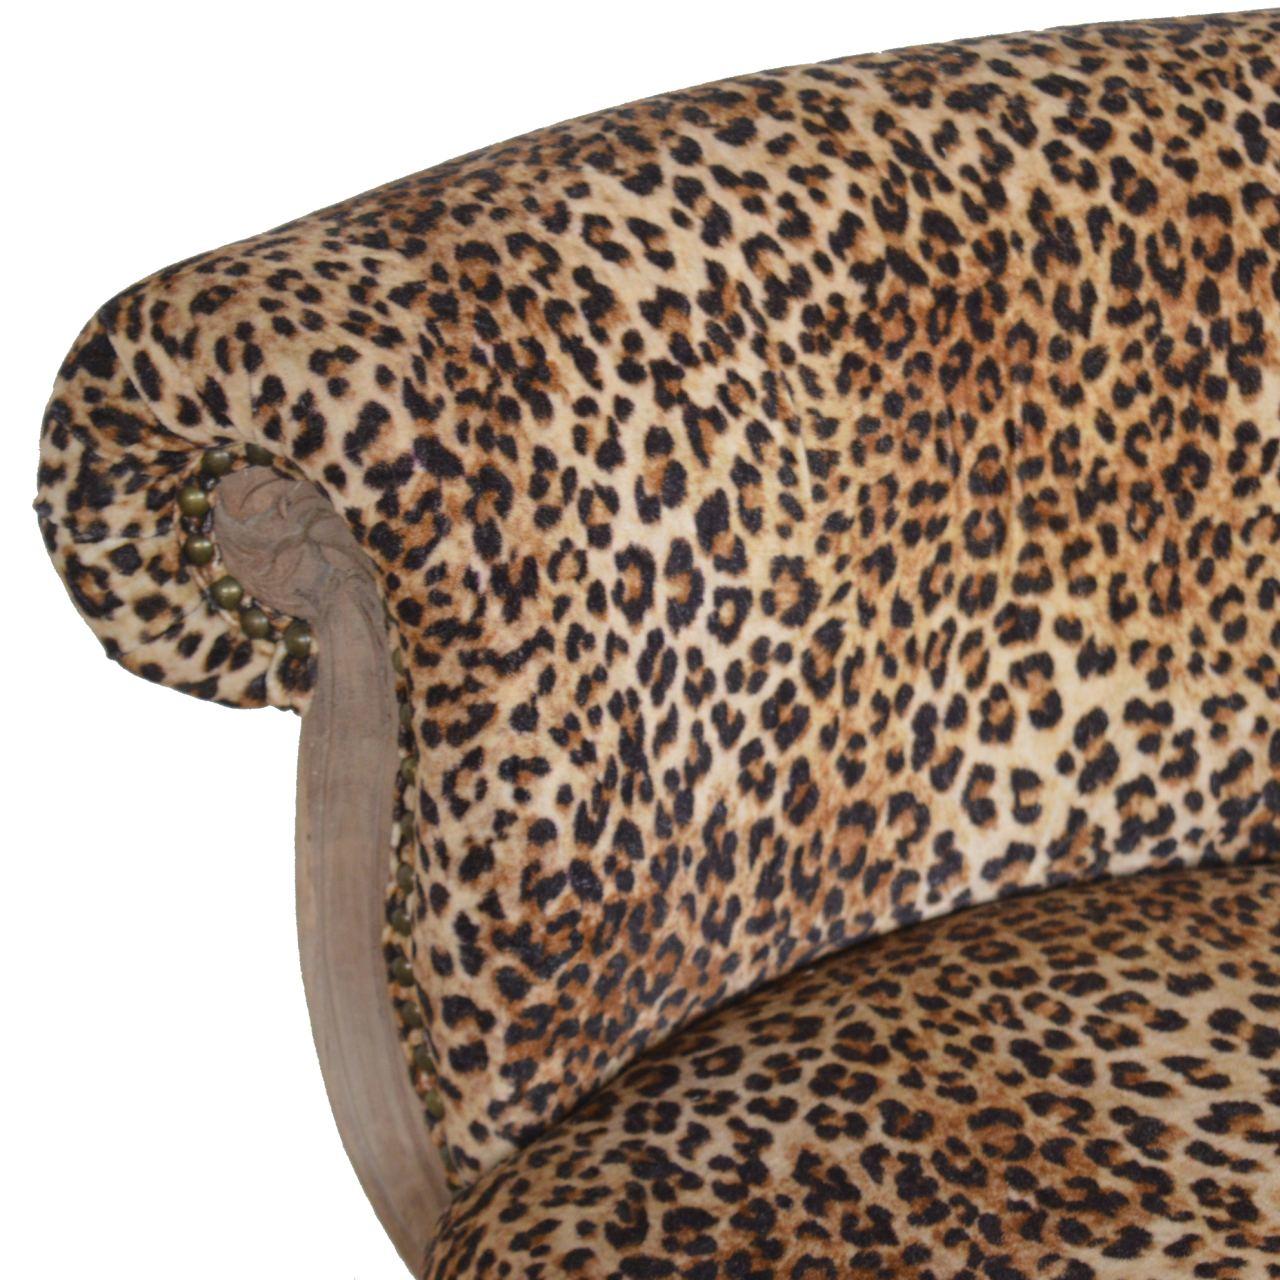 Leopard Print Studded Chair with Cabriole Legs